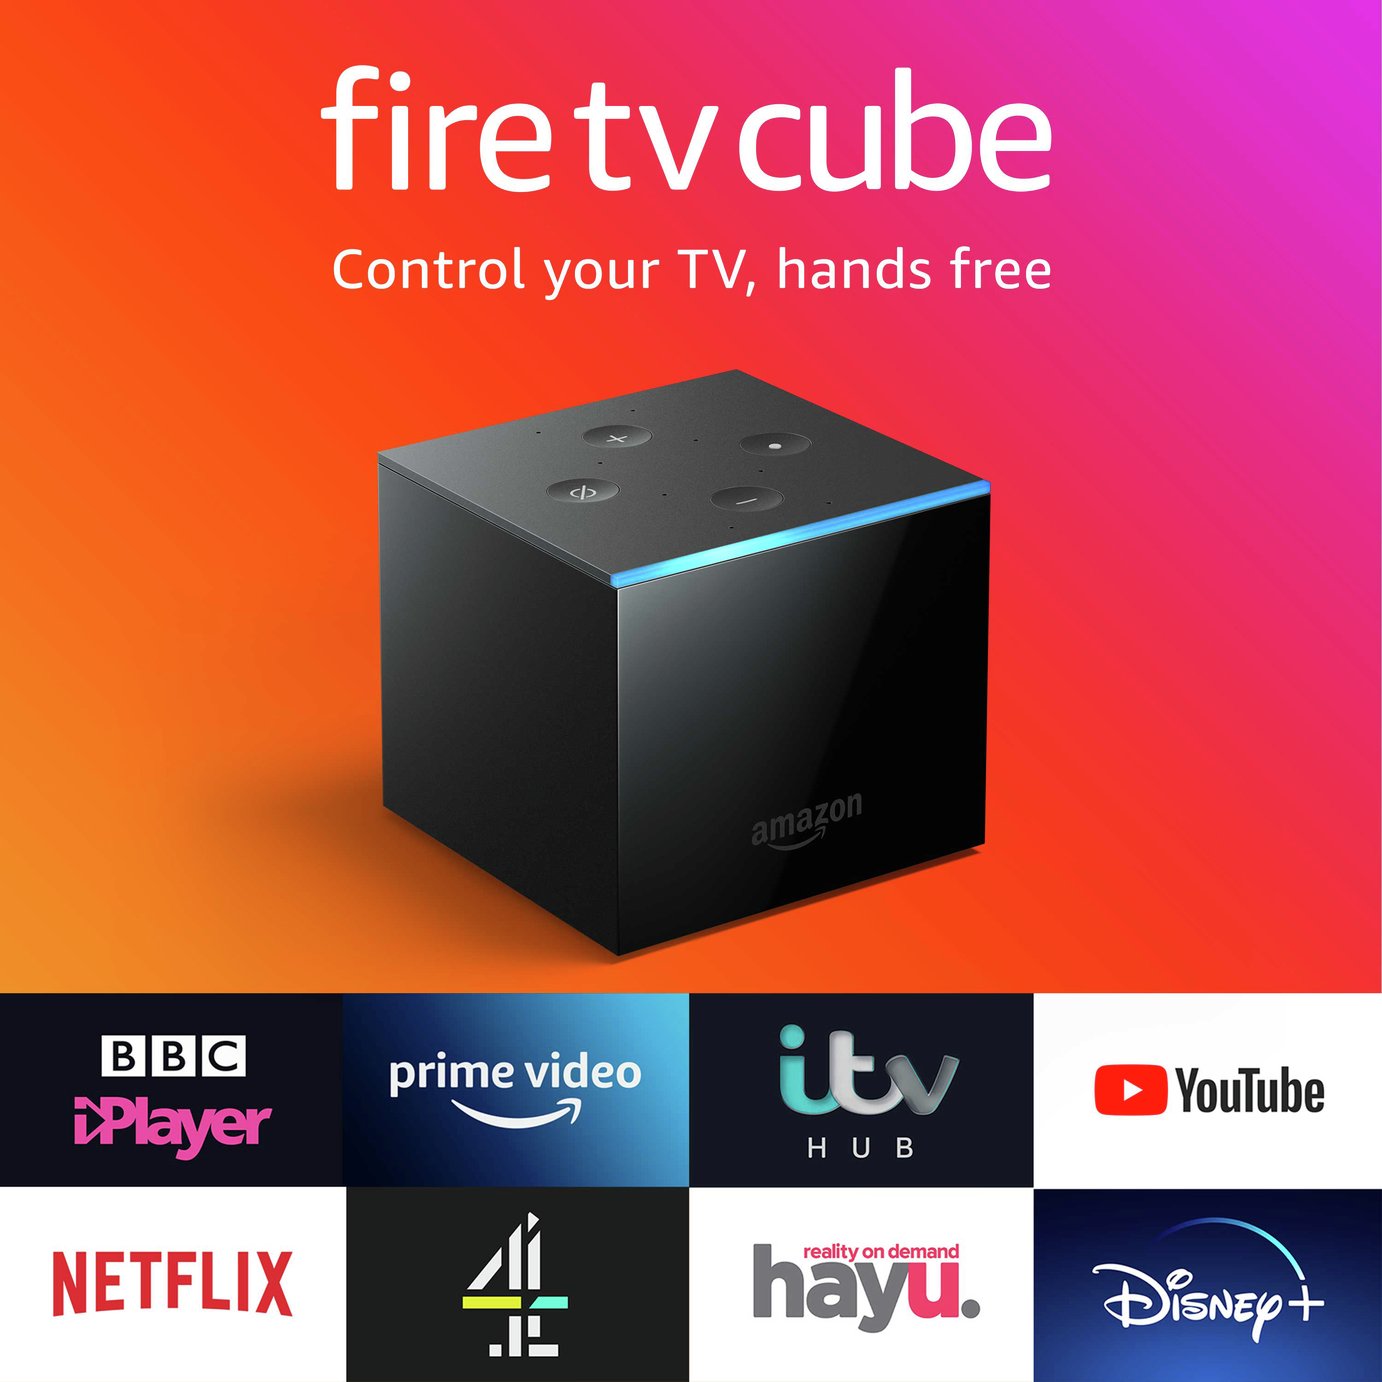 Fire TV Cube (2019) 4K Ultra HD Streaming Media Player Review